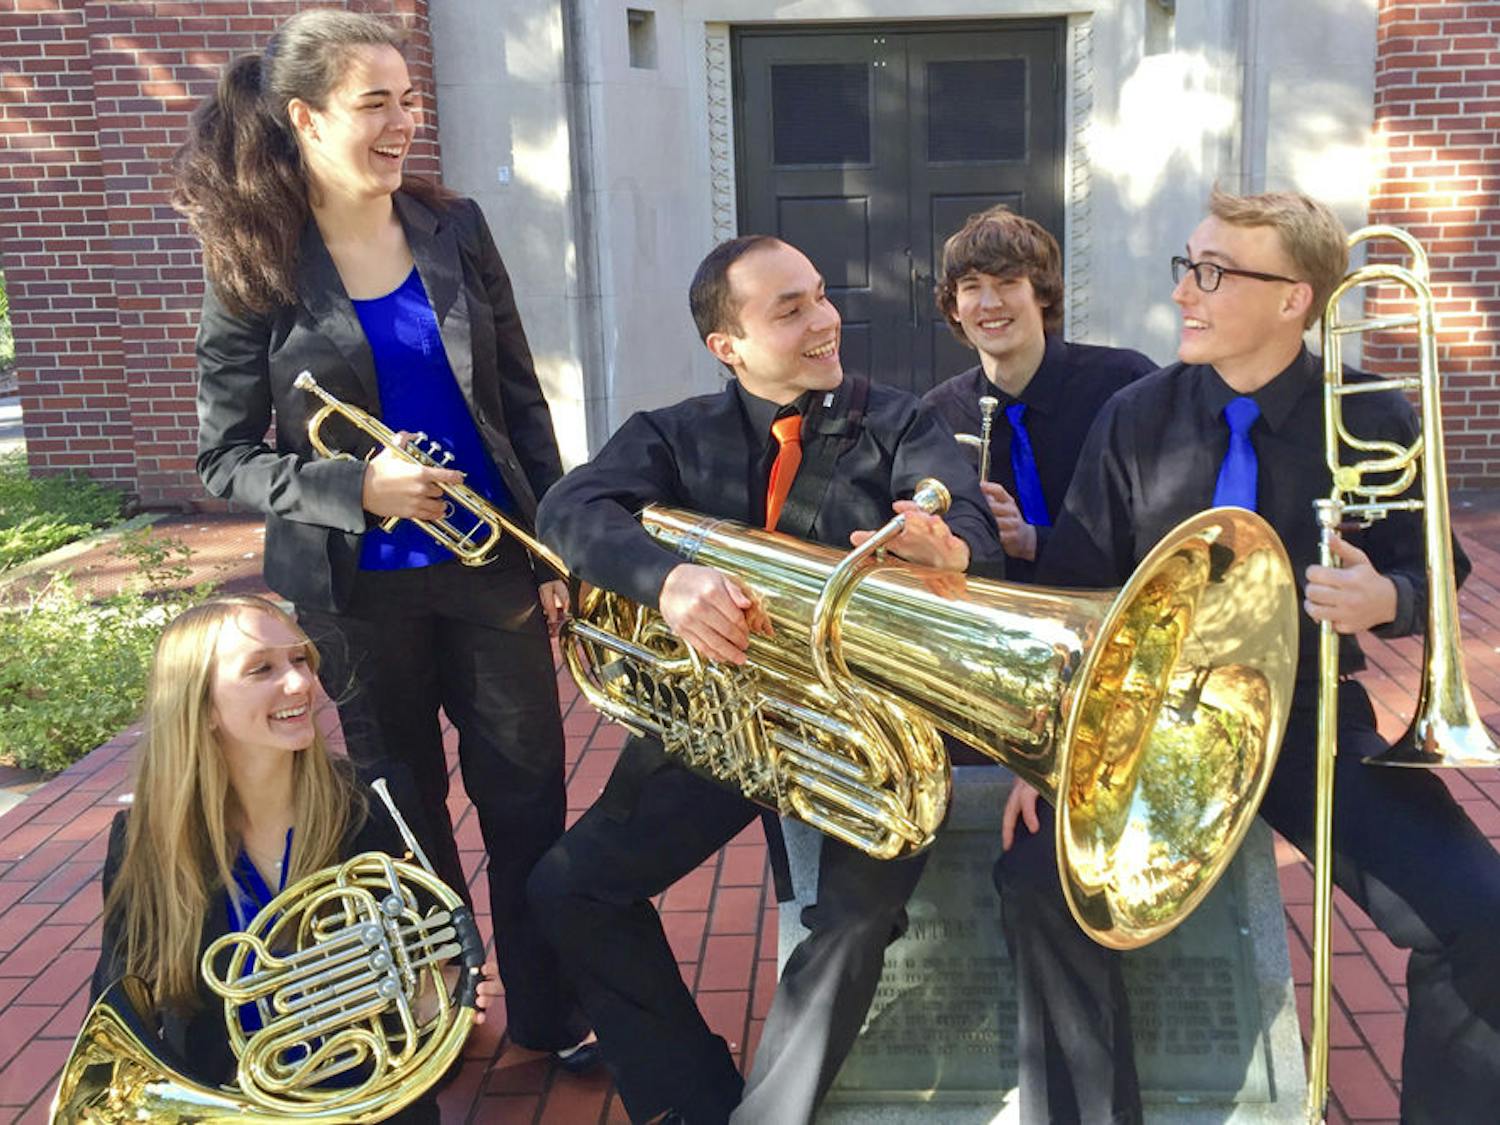 From left: Audrey Bridge, 20, Cara McDermott, 20, Ismael Sandoval, 21, Lucas Owen, 20, and Neal Romberg, 21, pose for a photo outside Century Tower. Together, the five form the Seven Cents Brass Quintet.